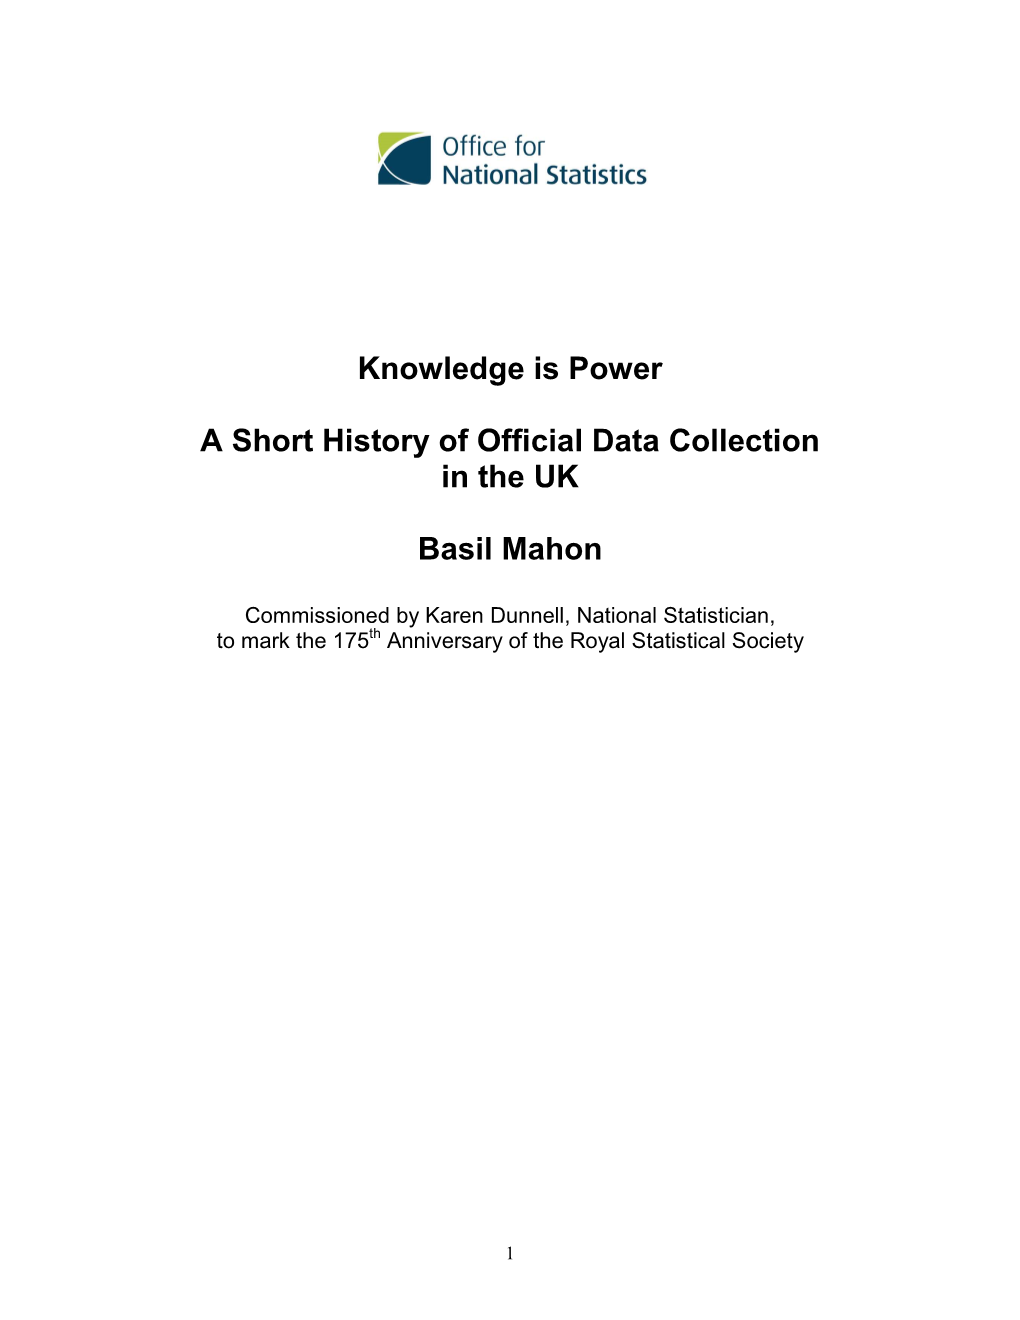 Knowledge Is Power a Short History of Official Data Collection in the UK Basil Mahon